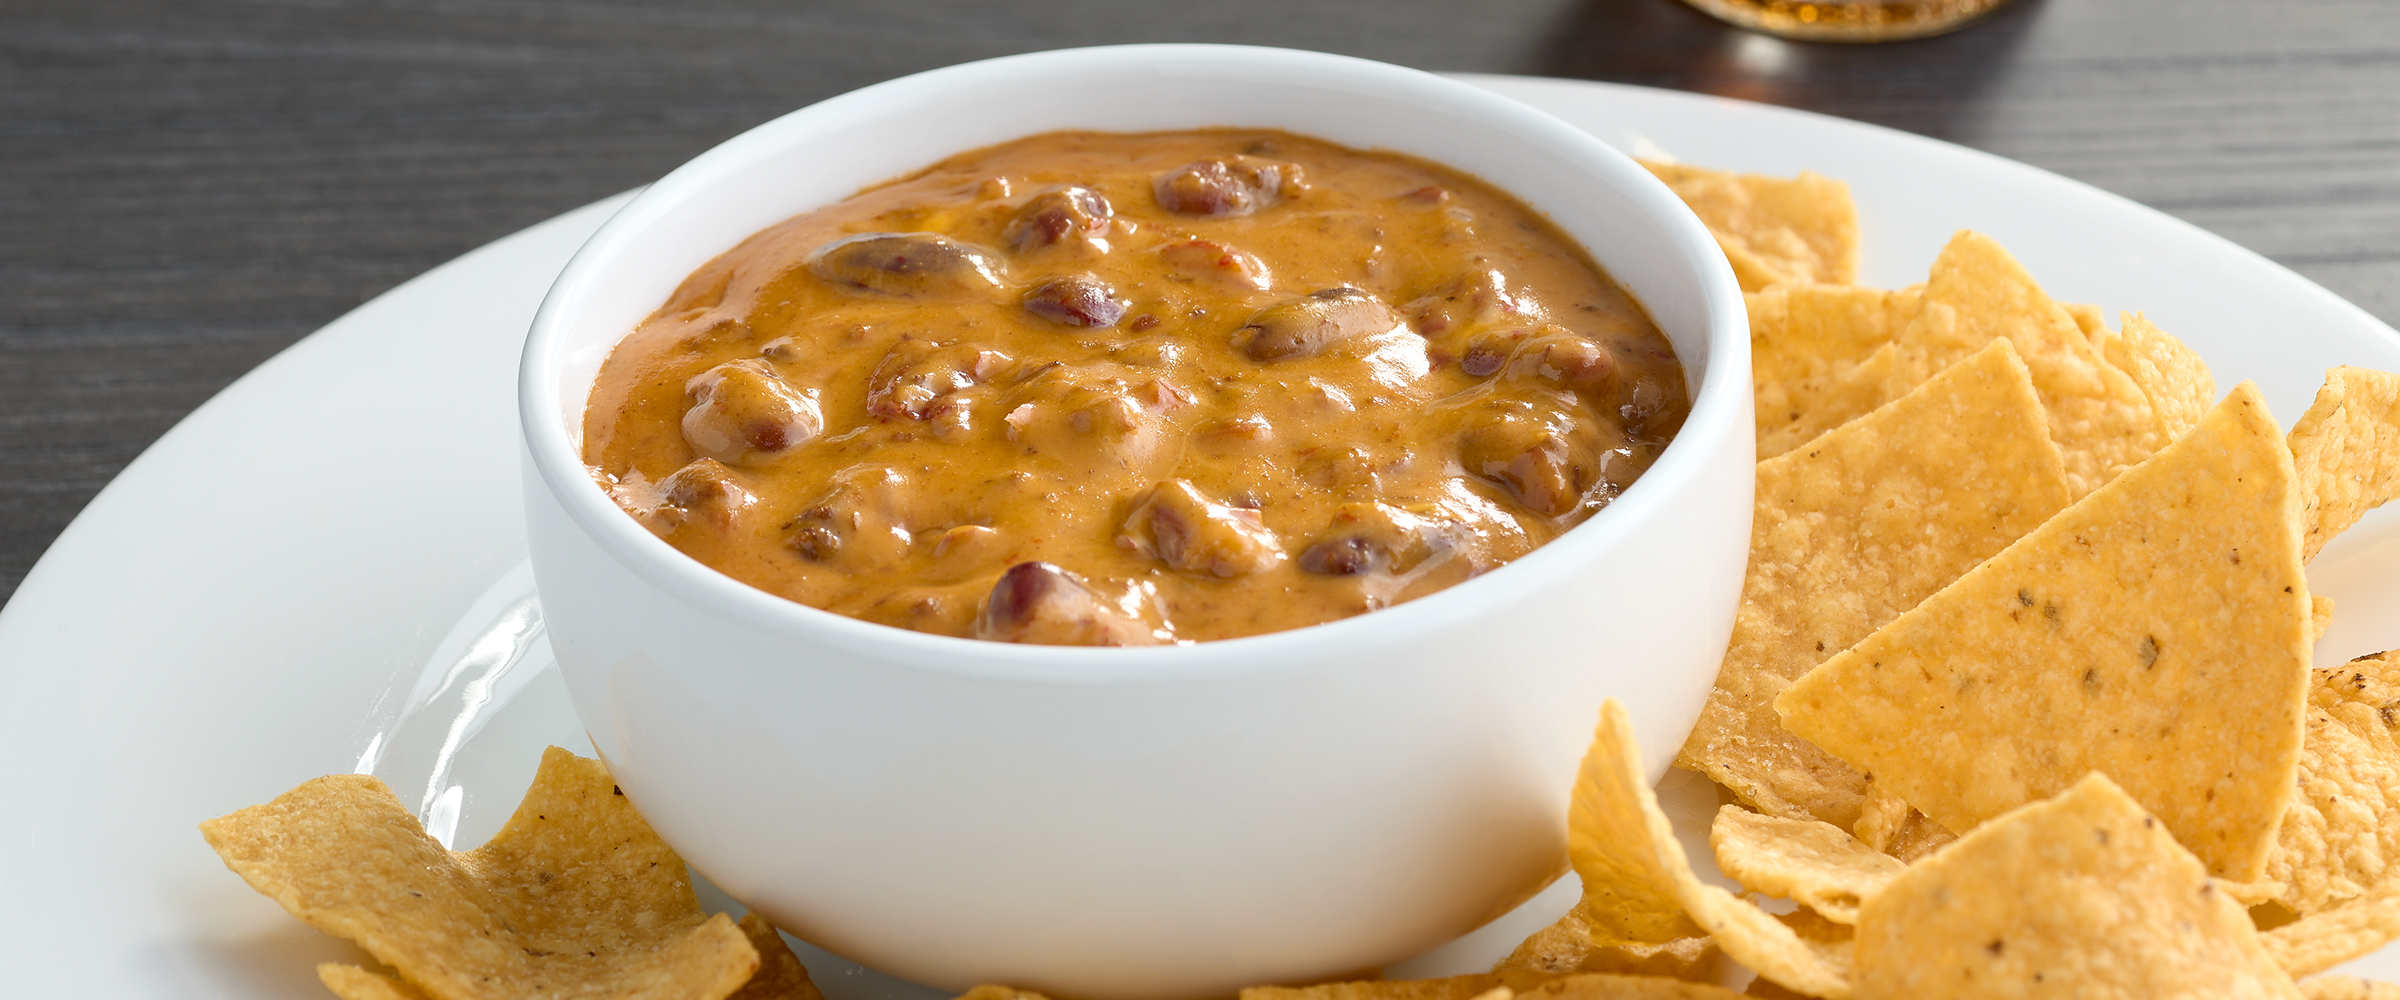 Microwave Chili Cheese Dip with tortillas on a white plate